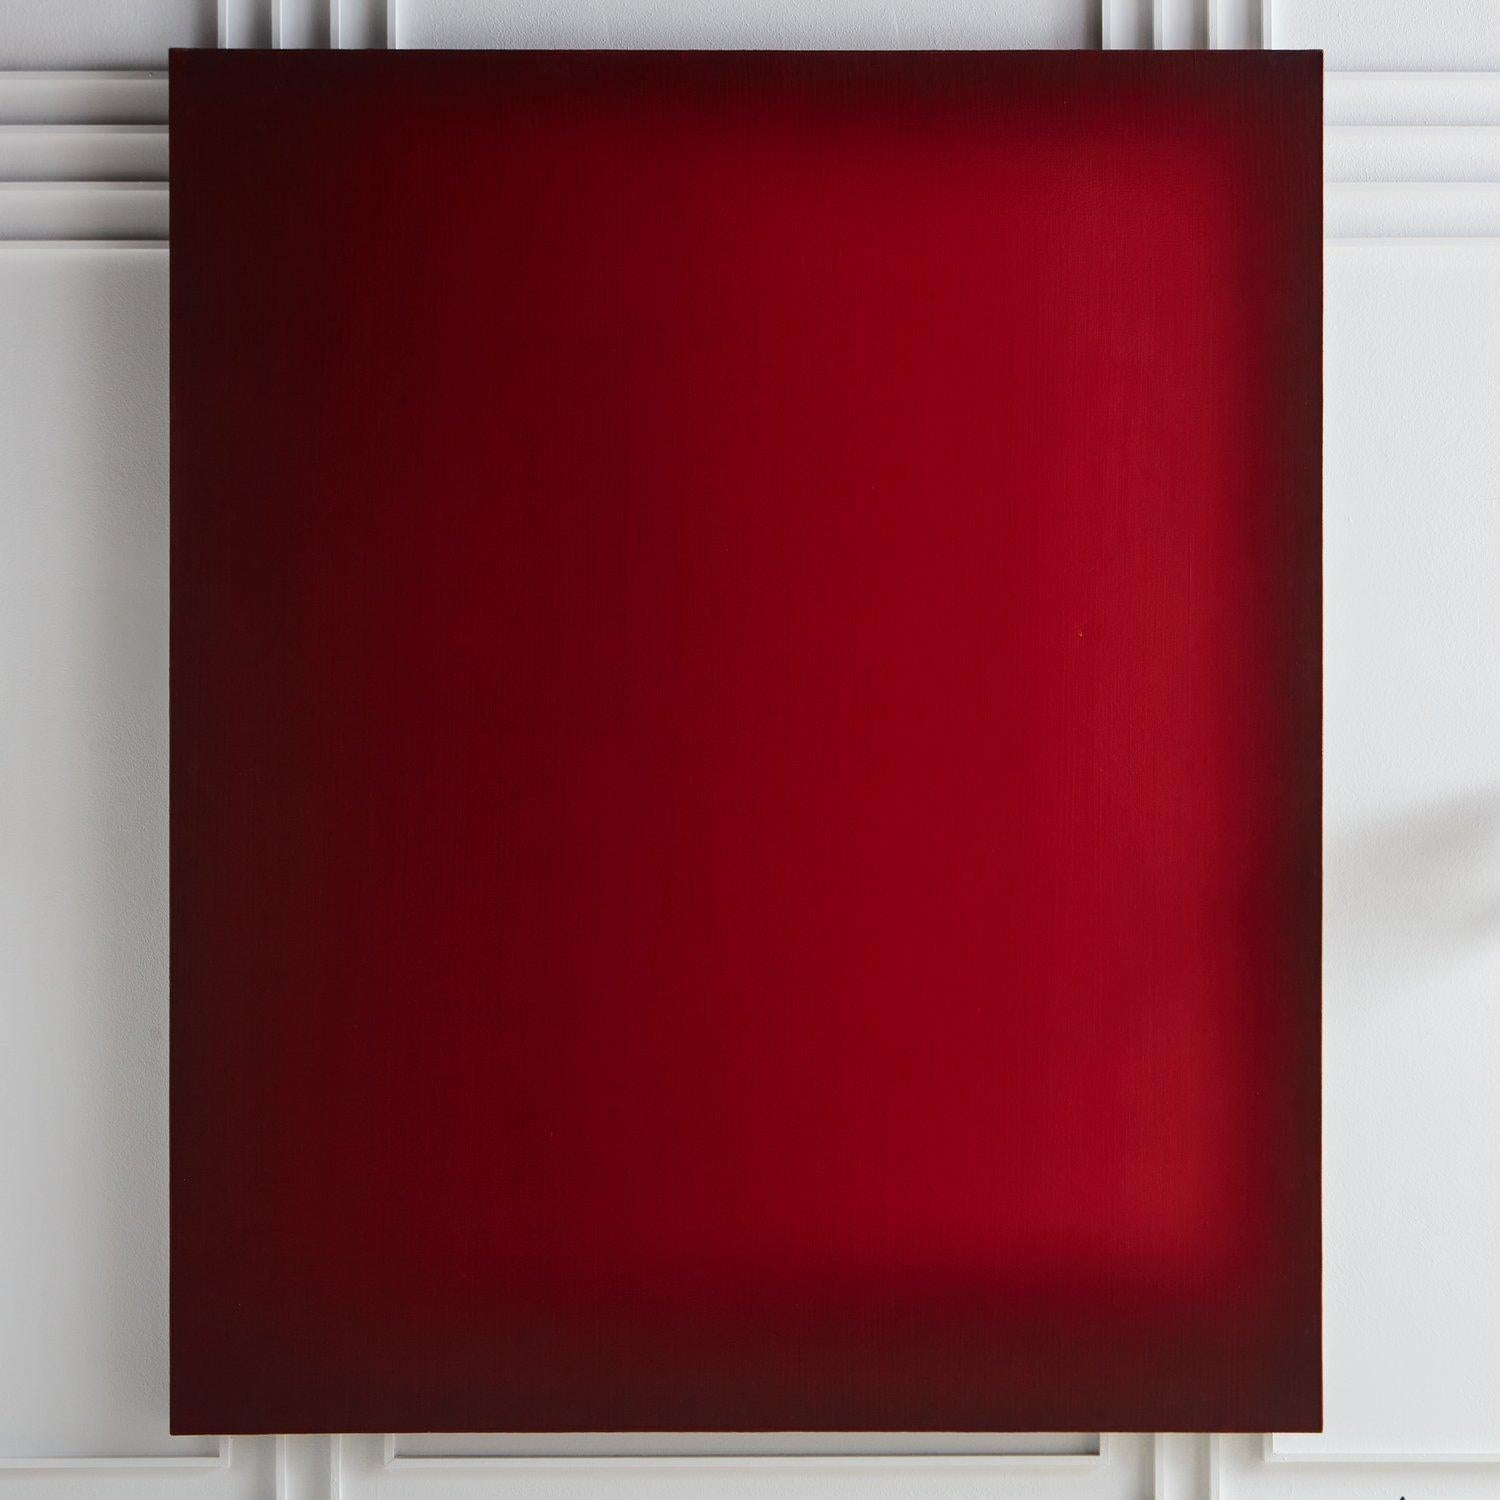 A monumental acrylic painting on canvas by American artist Marc Ross, 2003. This minimal abstract painting features an impressive gradation of red hues, giving it an astonishing sense of depth. Signed, dated and titled en verso. Presented unframed.